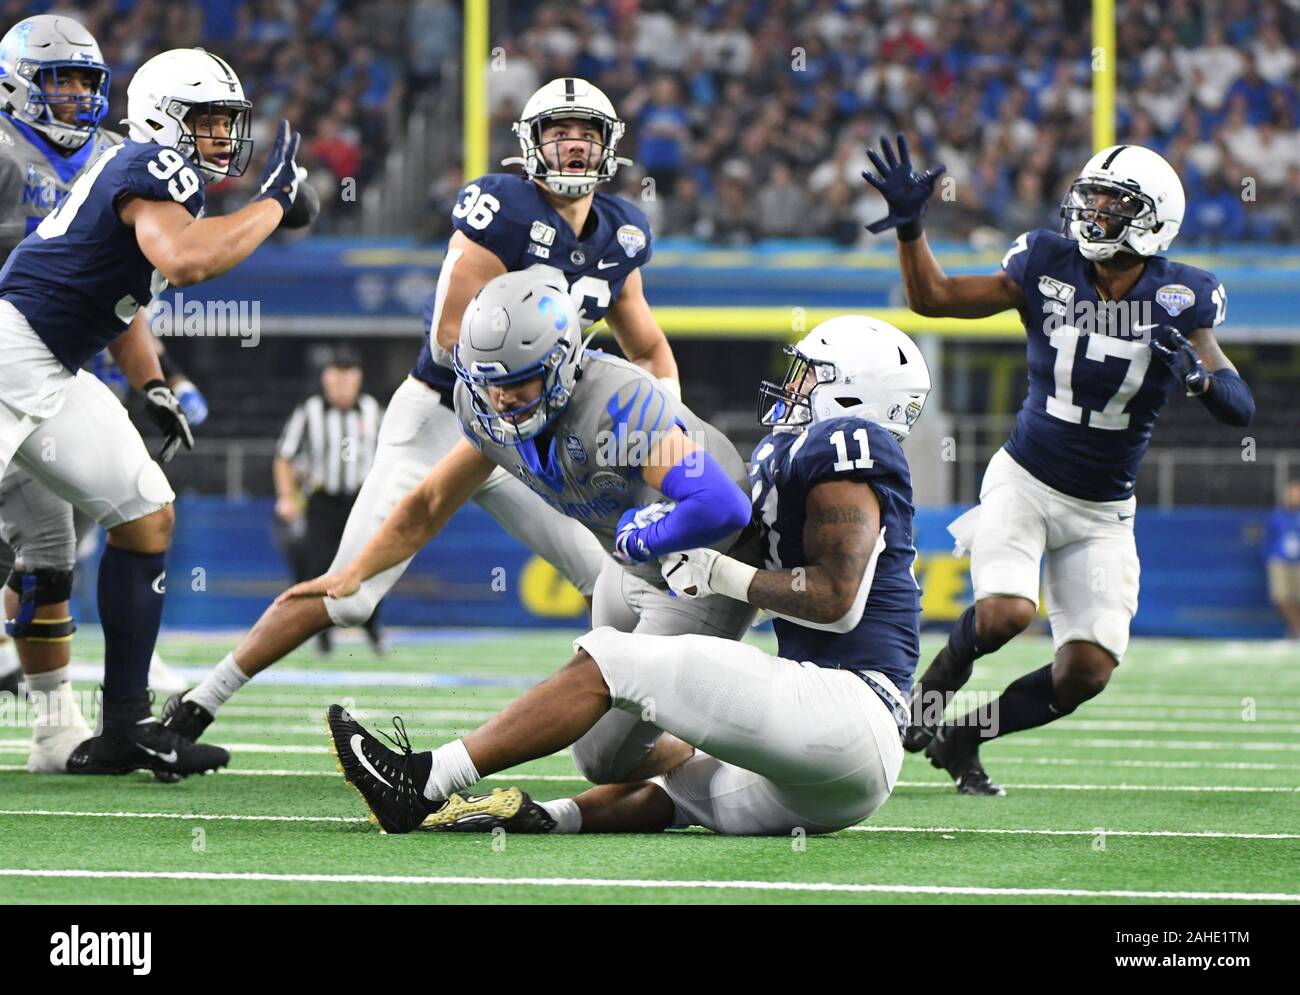 Arlington, United States. 28th Dec, 2019. Penn State's Micah Parsons sacks Memphis Tigers Brady White resulting in an interception by Garrett Taylor (17) in 84th Goodyear Cotton Bowl Classic on Saturday, December 28, 2019 at AT&T Stadium. The Nittany Lions defeated the Tigers 53-39. Photo by Ian Halperin/UPI Credit: UPI/Alamy Live News Stock Photo